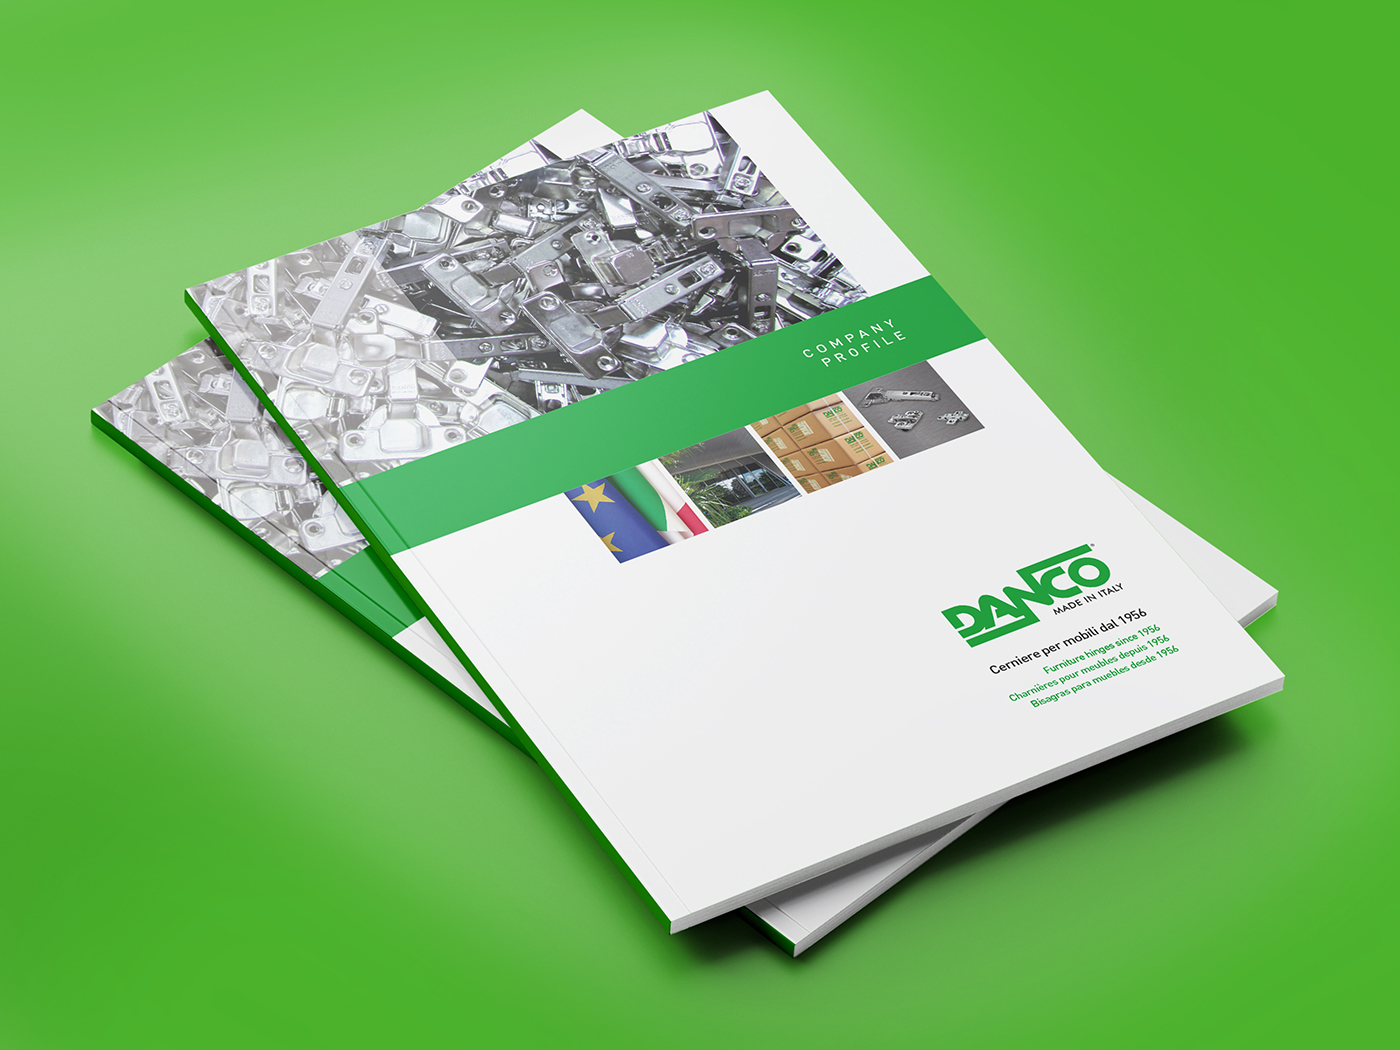 Corporate identity and product catalogues - danco